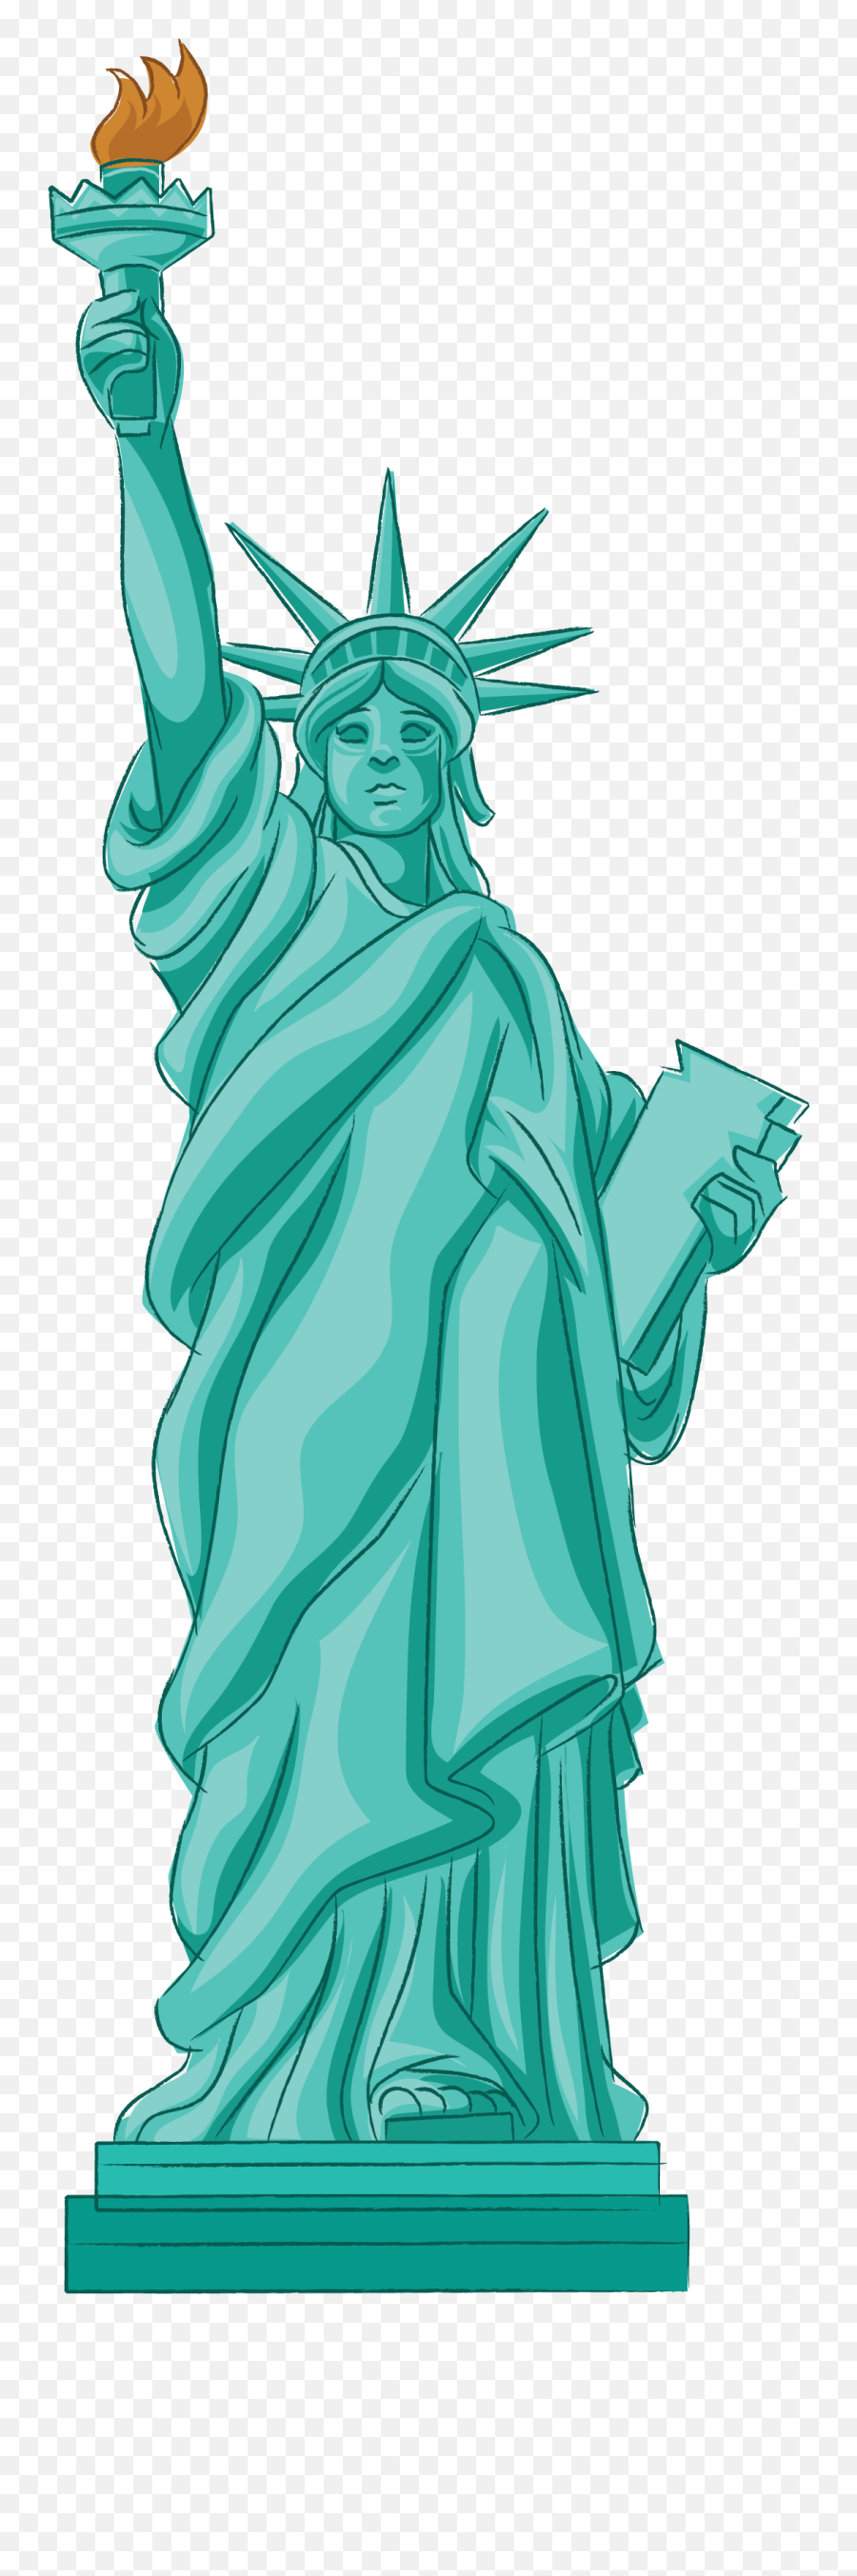 Painted Blue Statue Of Liberty With - Clip Art Statue Of Liberty Cartoon Emoji,Statue Of Liberty Emotions Of Surprised